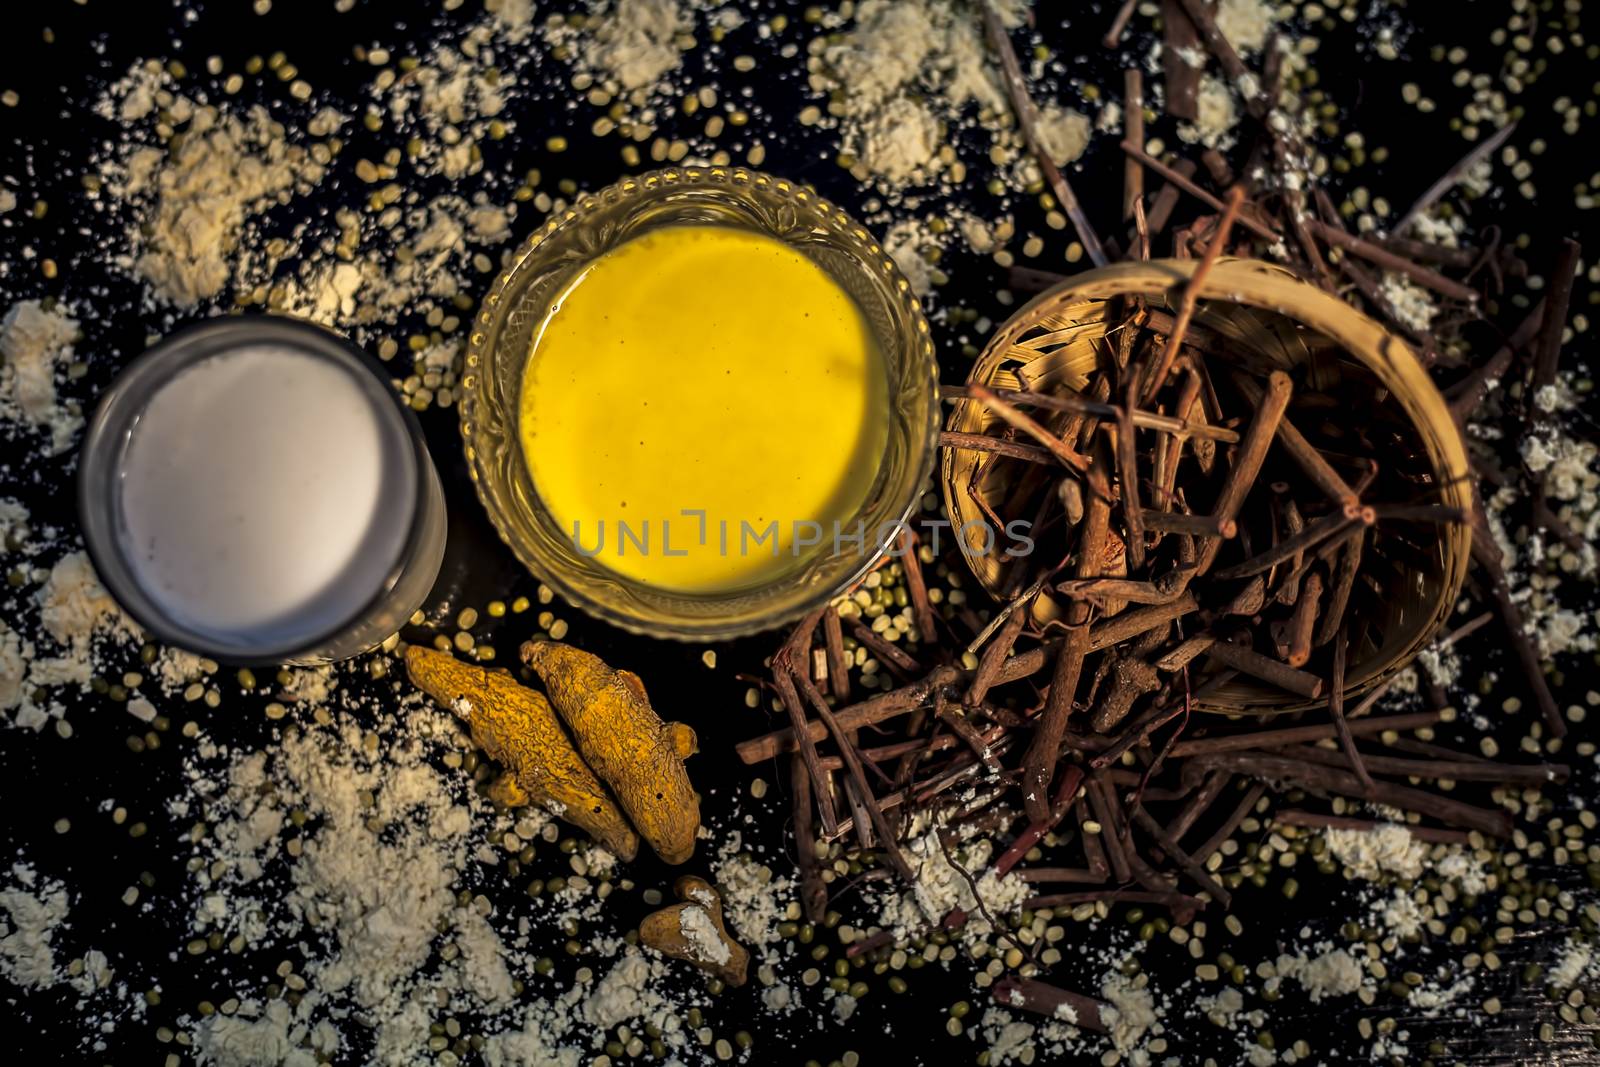 Ayurvedic blood purifier and skin glow face mask consisting of Manjistha, mung bean, haldi/turmeric, and milk. Horizontal shot of face mask with entire constituents with it on a black surface.